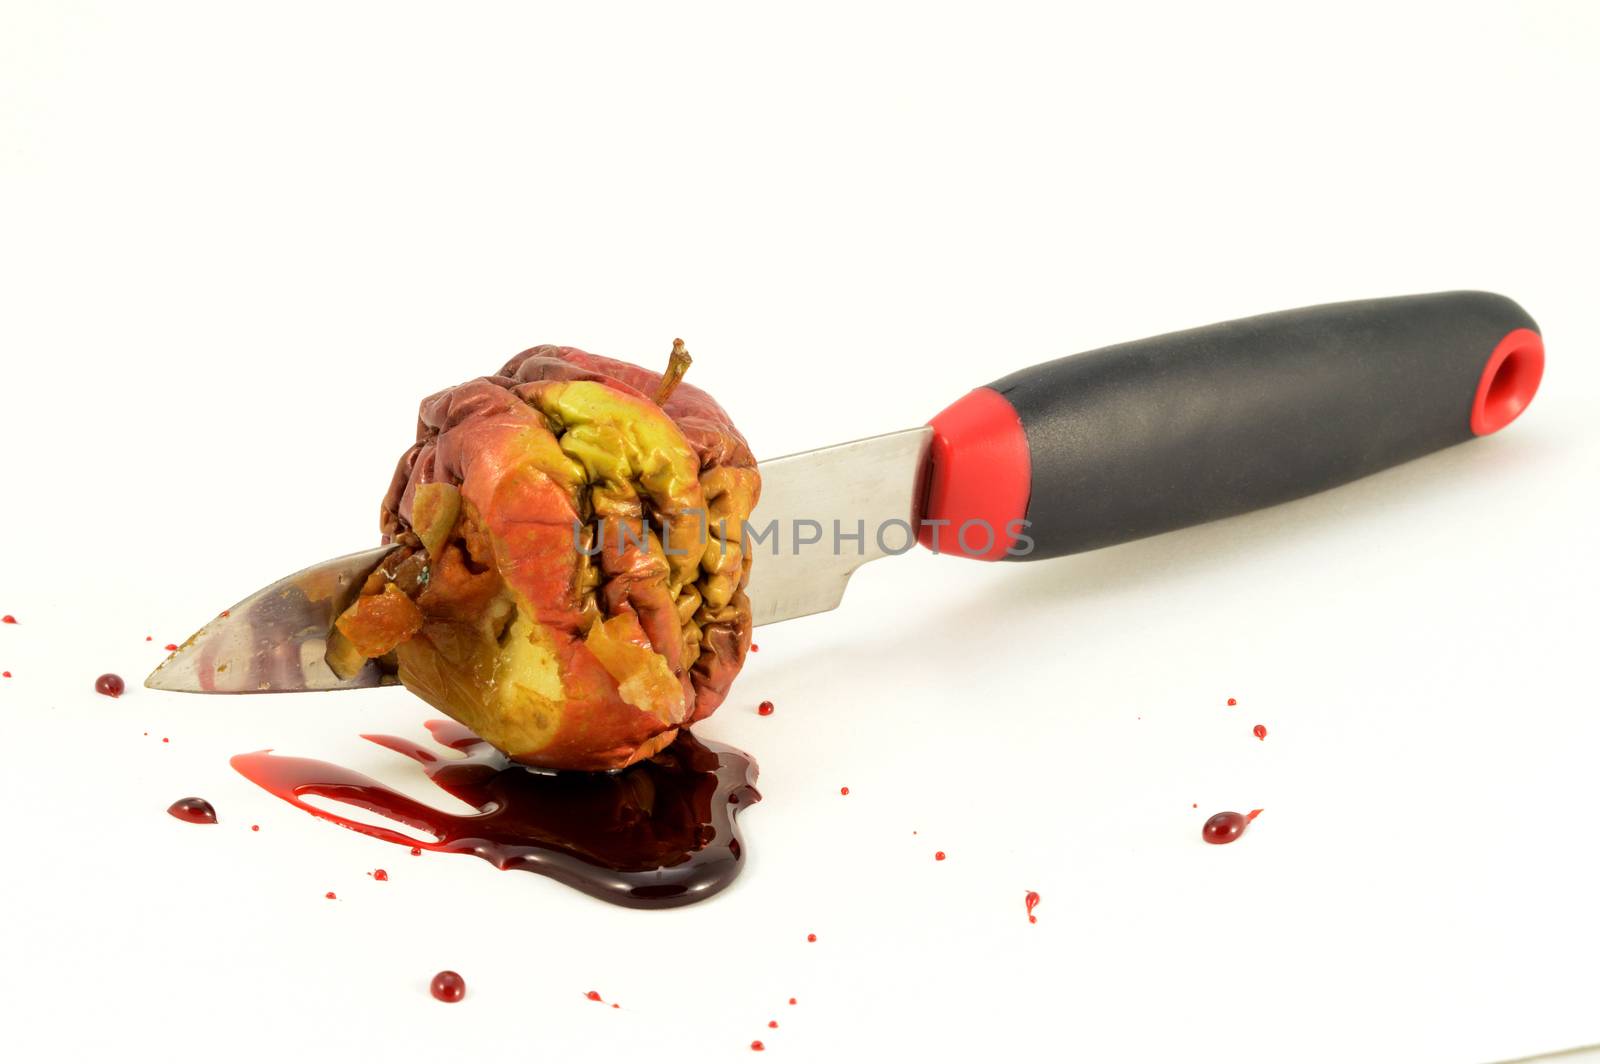 An isolated shot of one bad apple and a bloody knife wound.